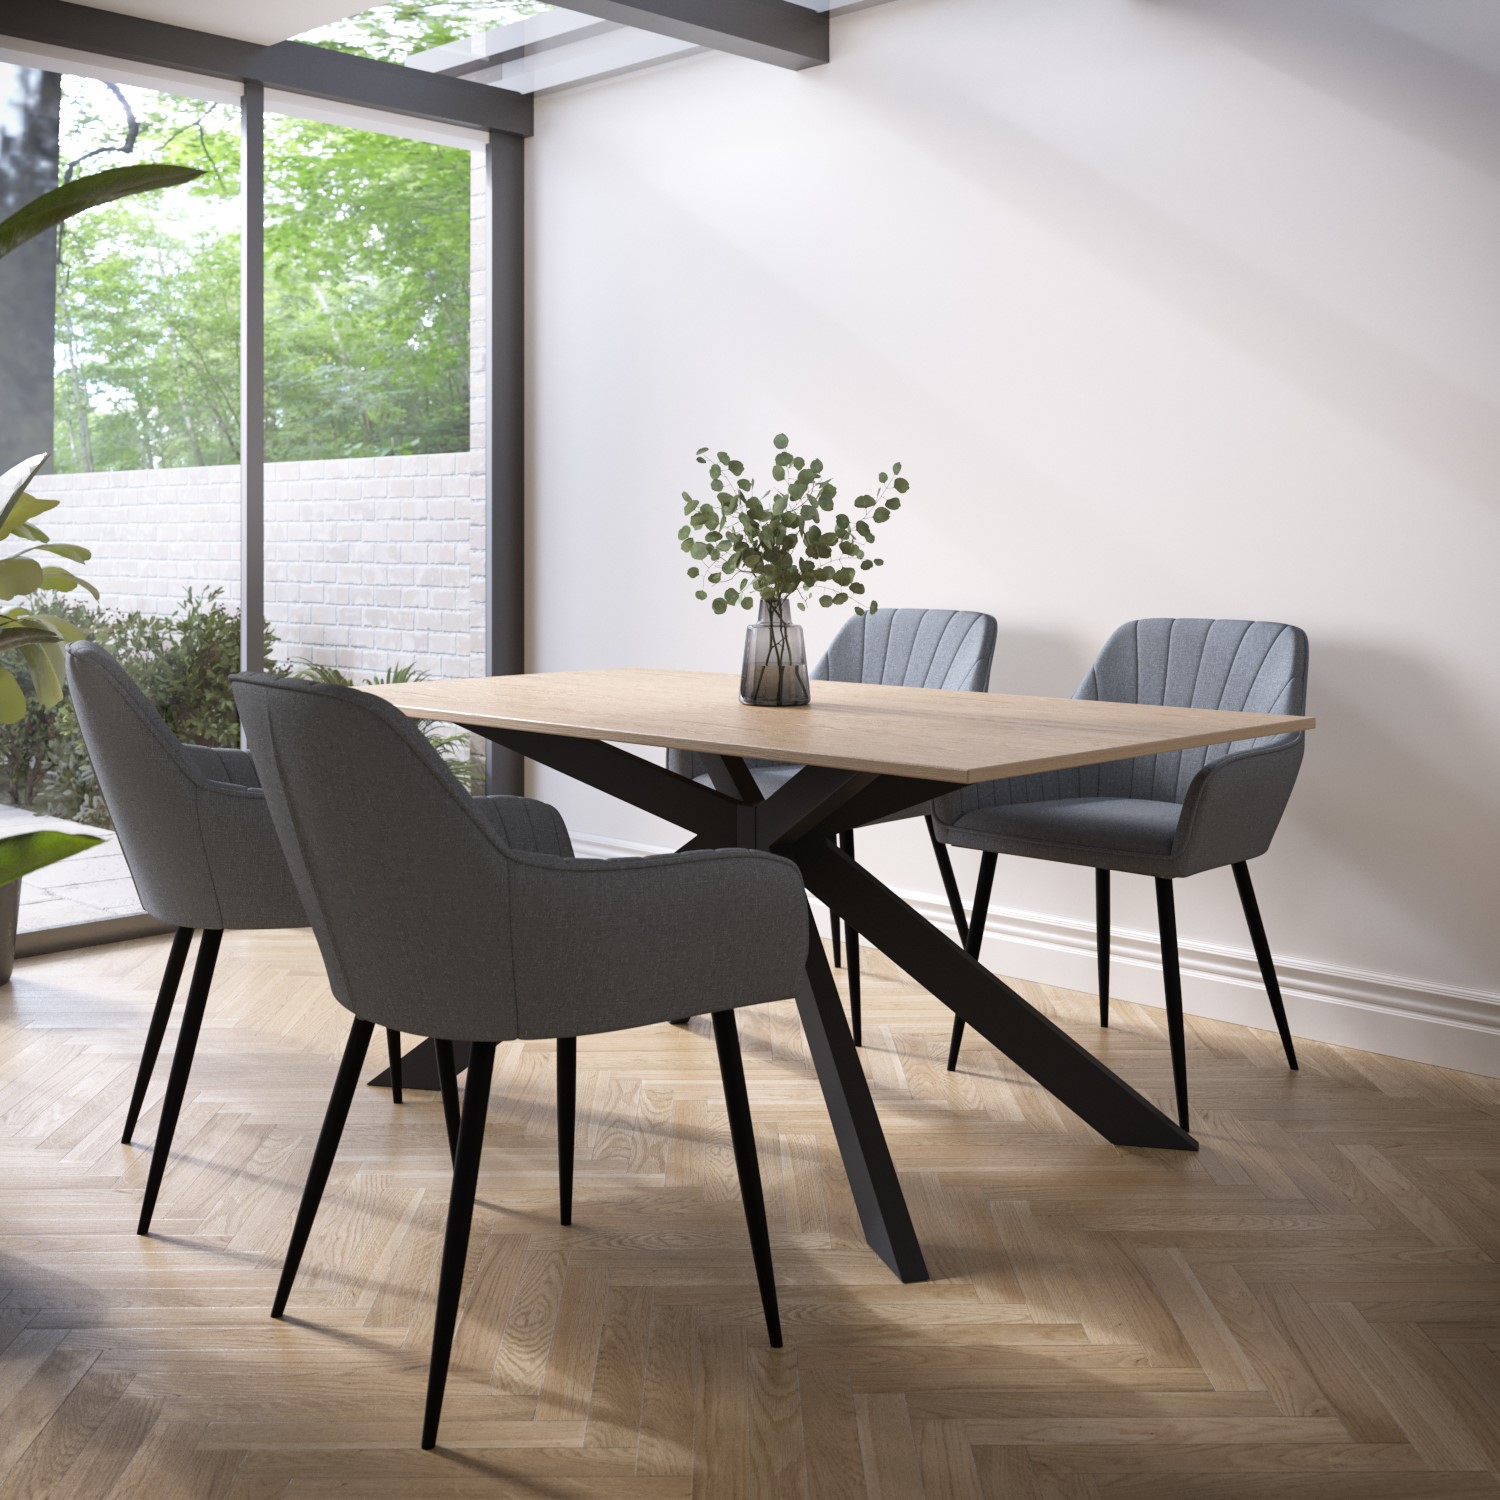 Photo of Light oak dining table with 4 grey fabric dining chairs - carson